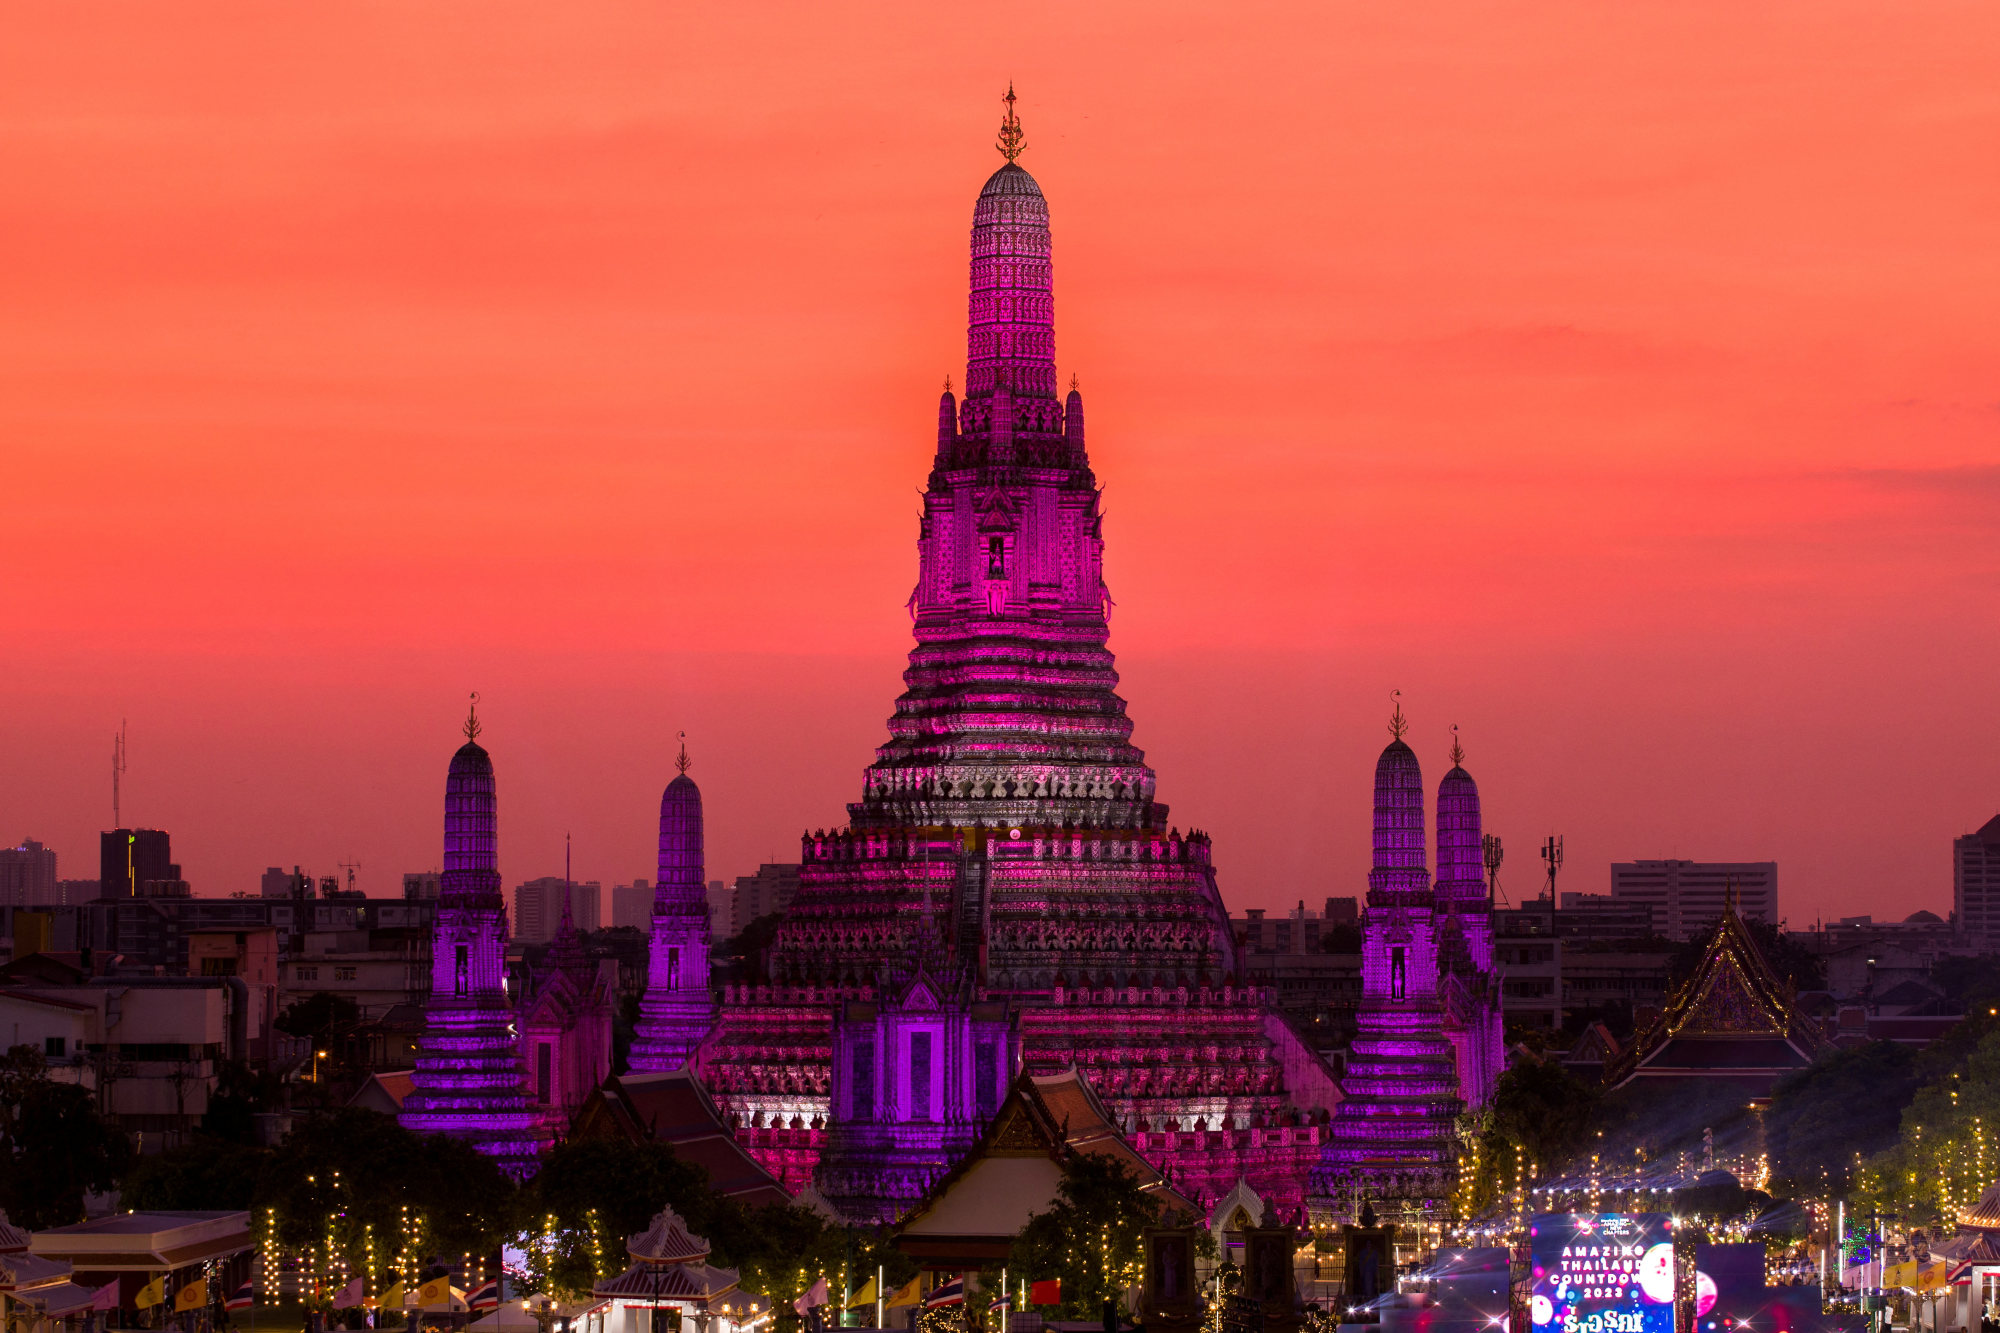 Lights illuminate Wat Arun –”the temple of dawn” – on New Year’s Eve in Bangkok, Thailand. Photo: Reuters